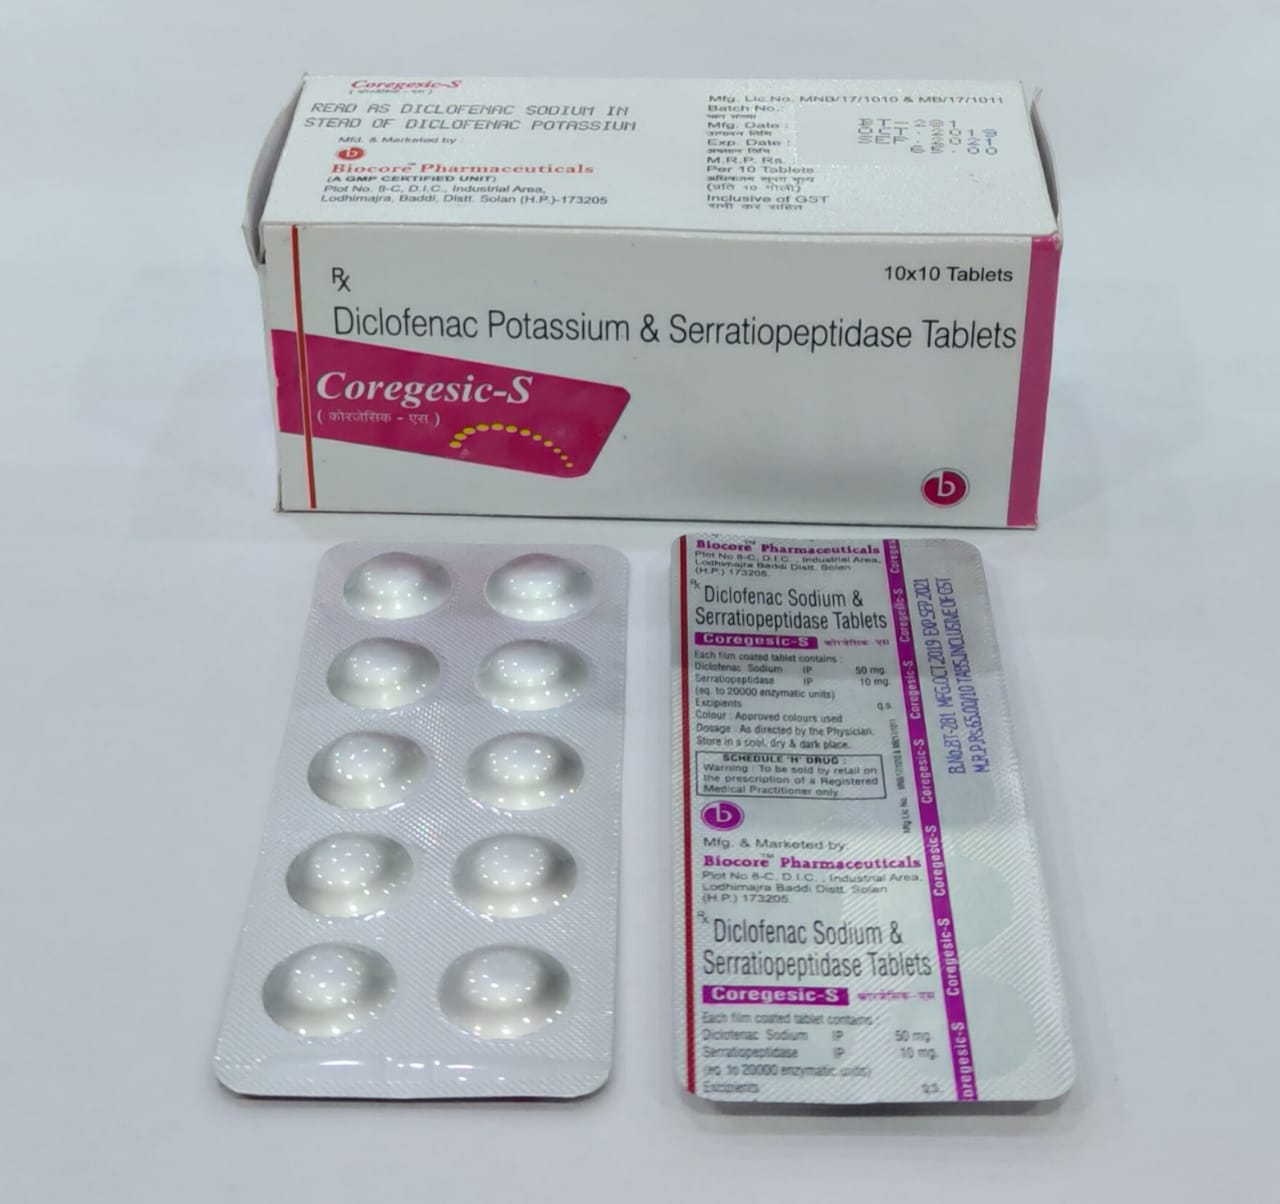 CORGESIC-S Tablets